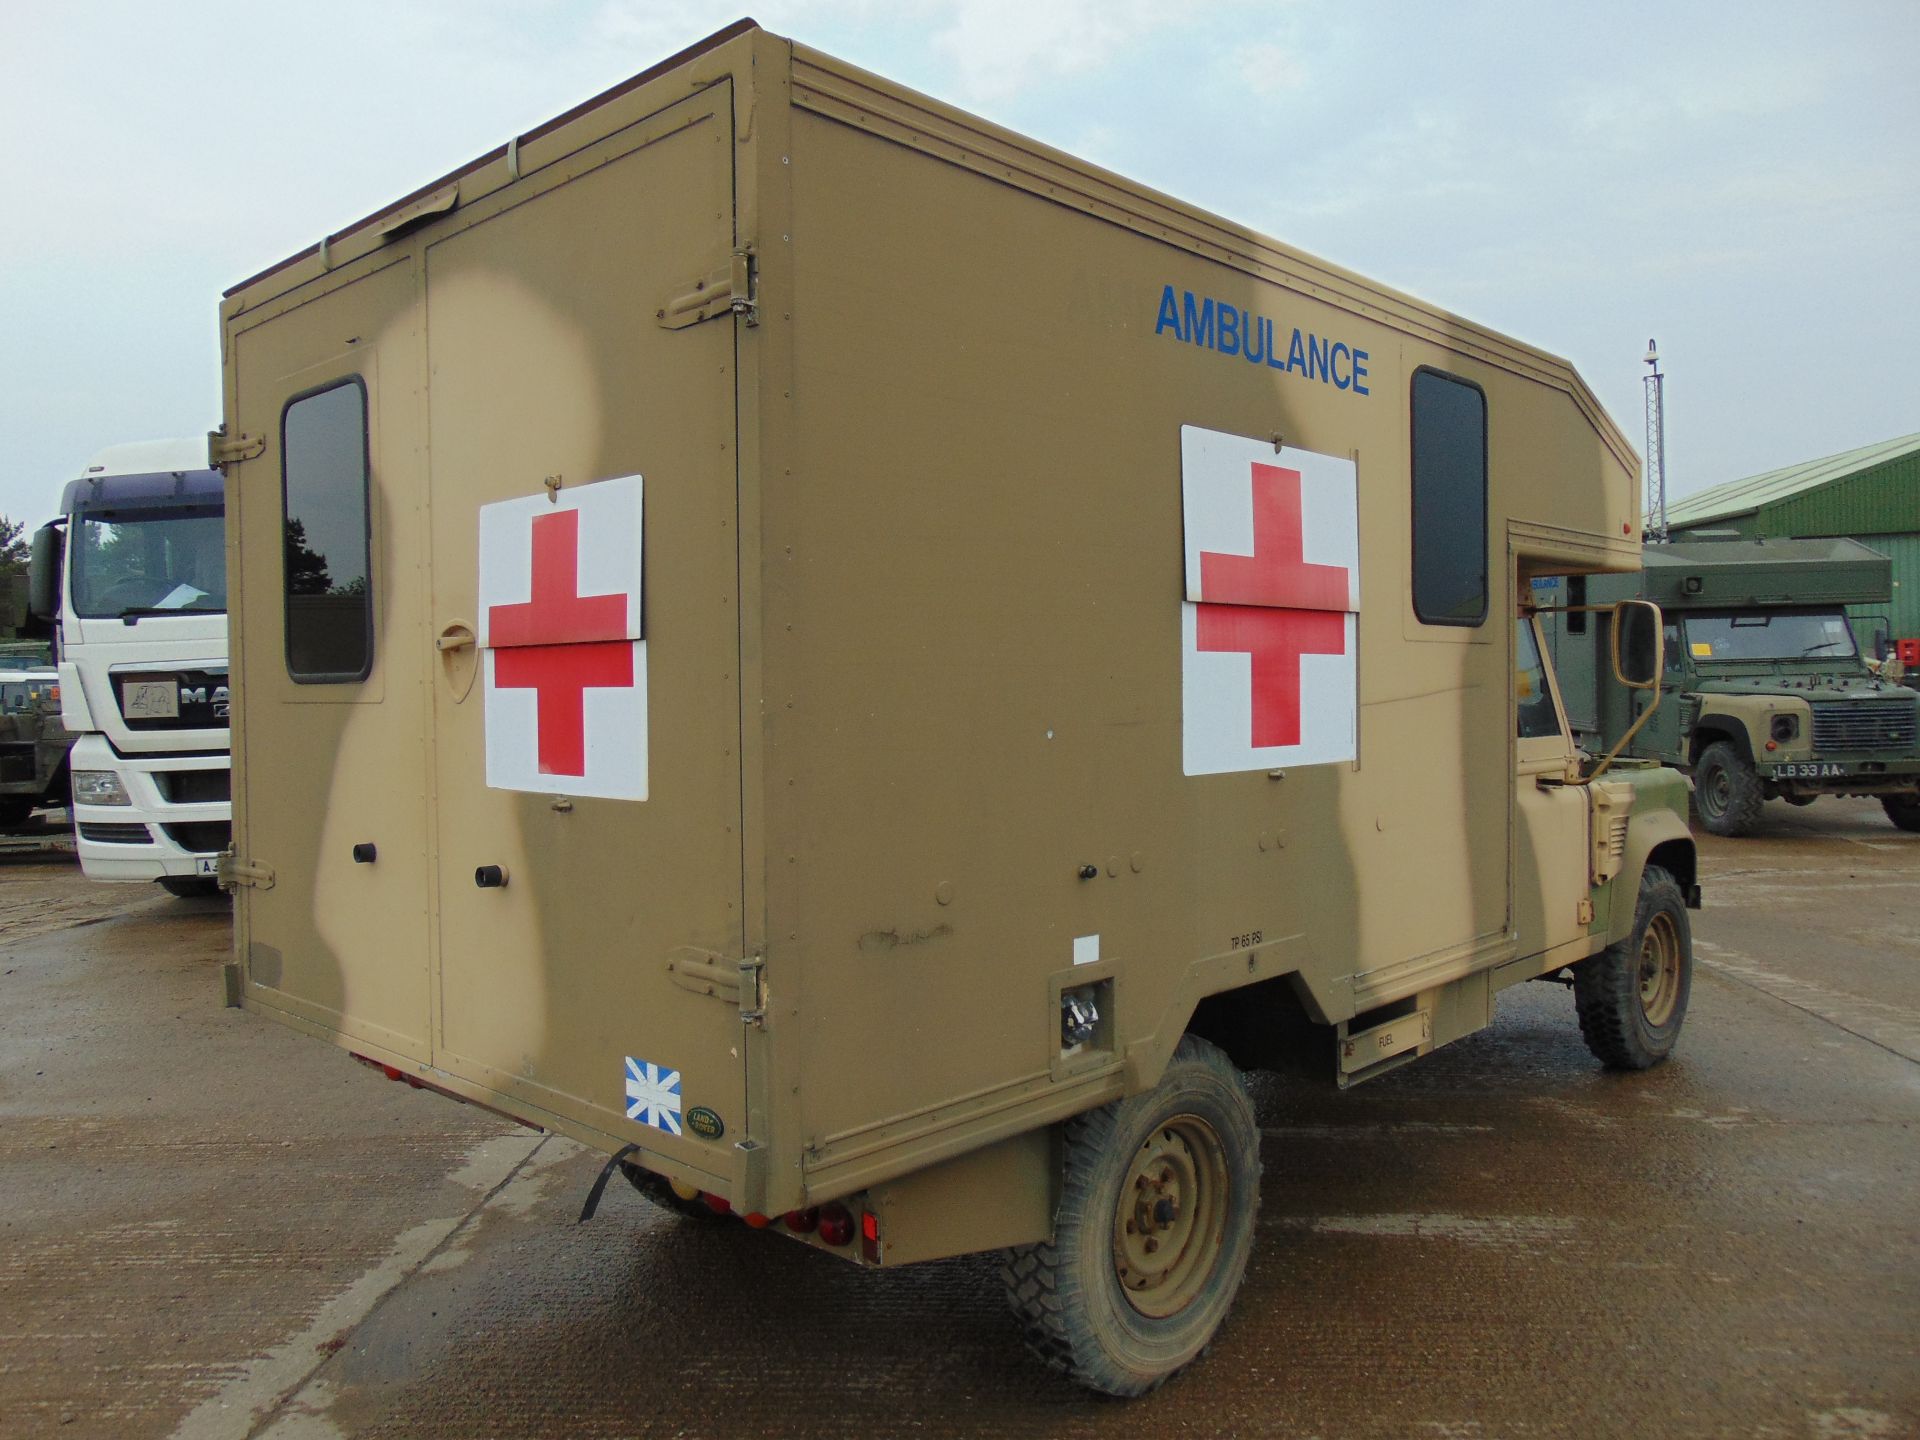 Military Specification Land Rover Wolf 130 ambulance - Image 8 of 21